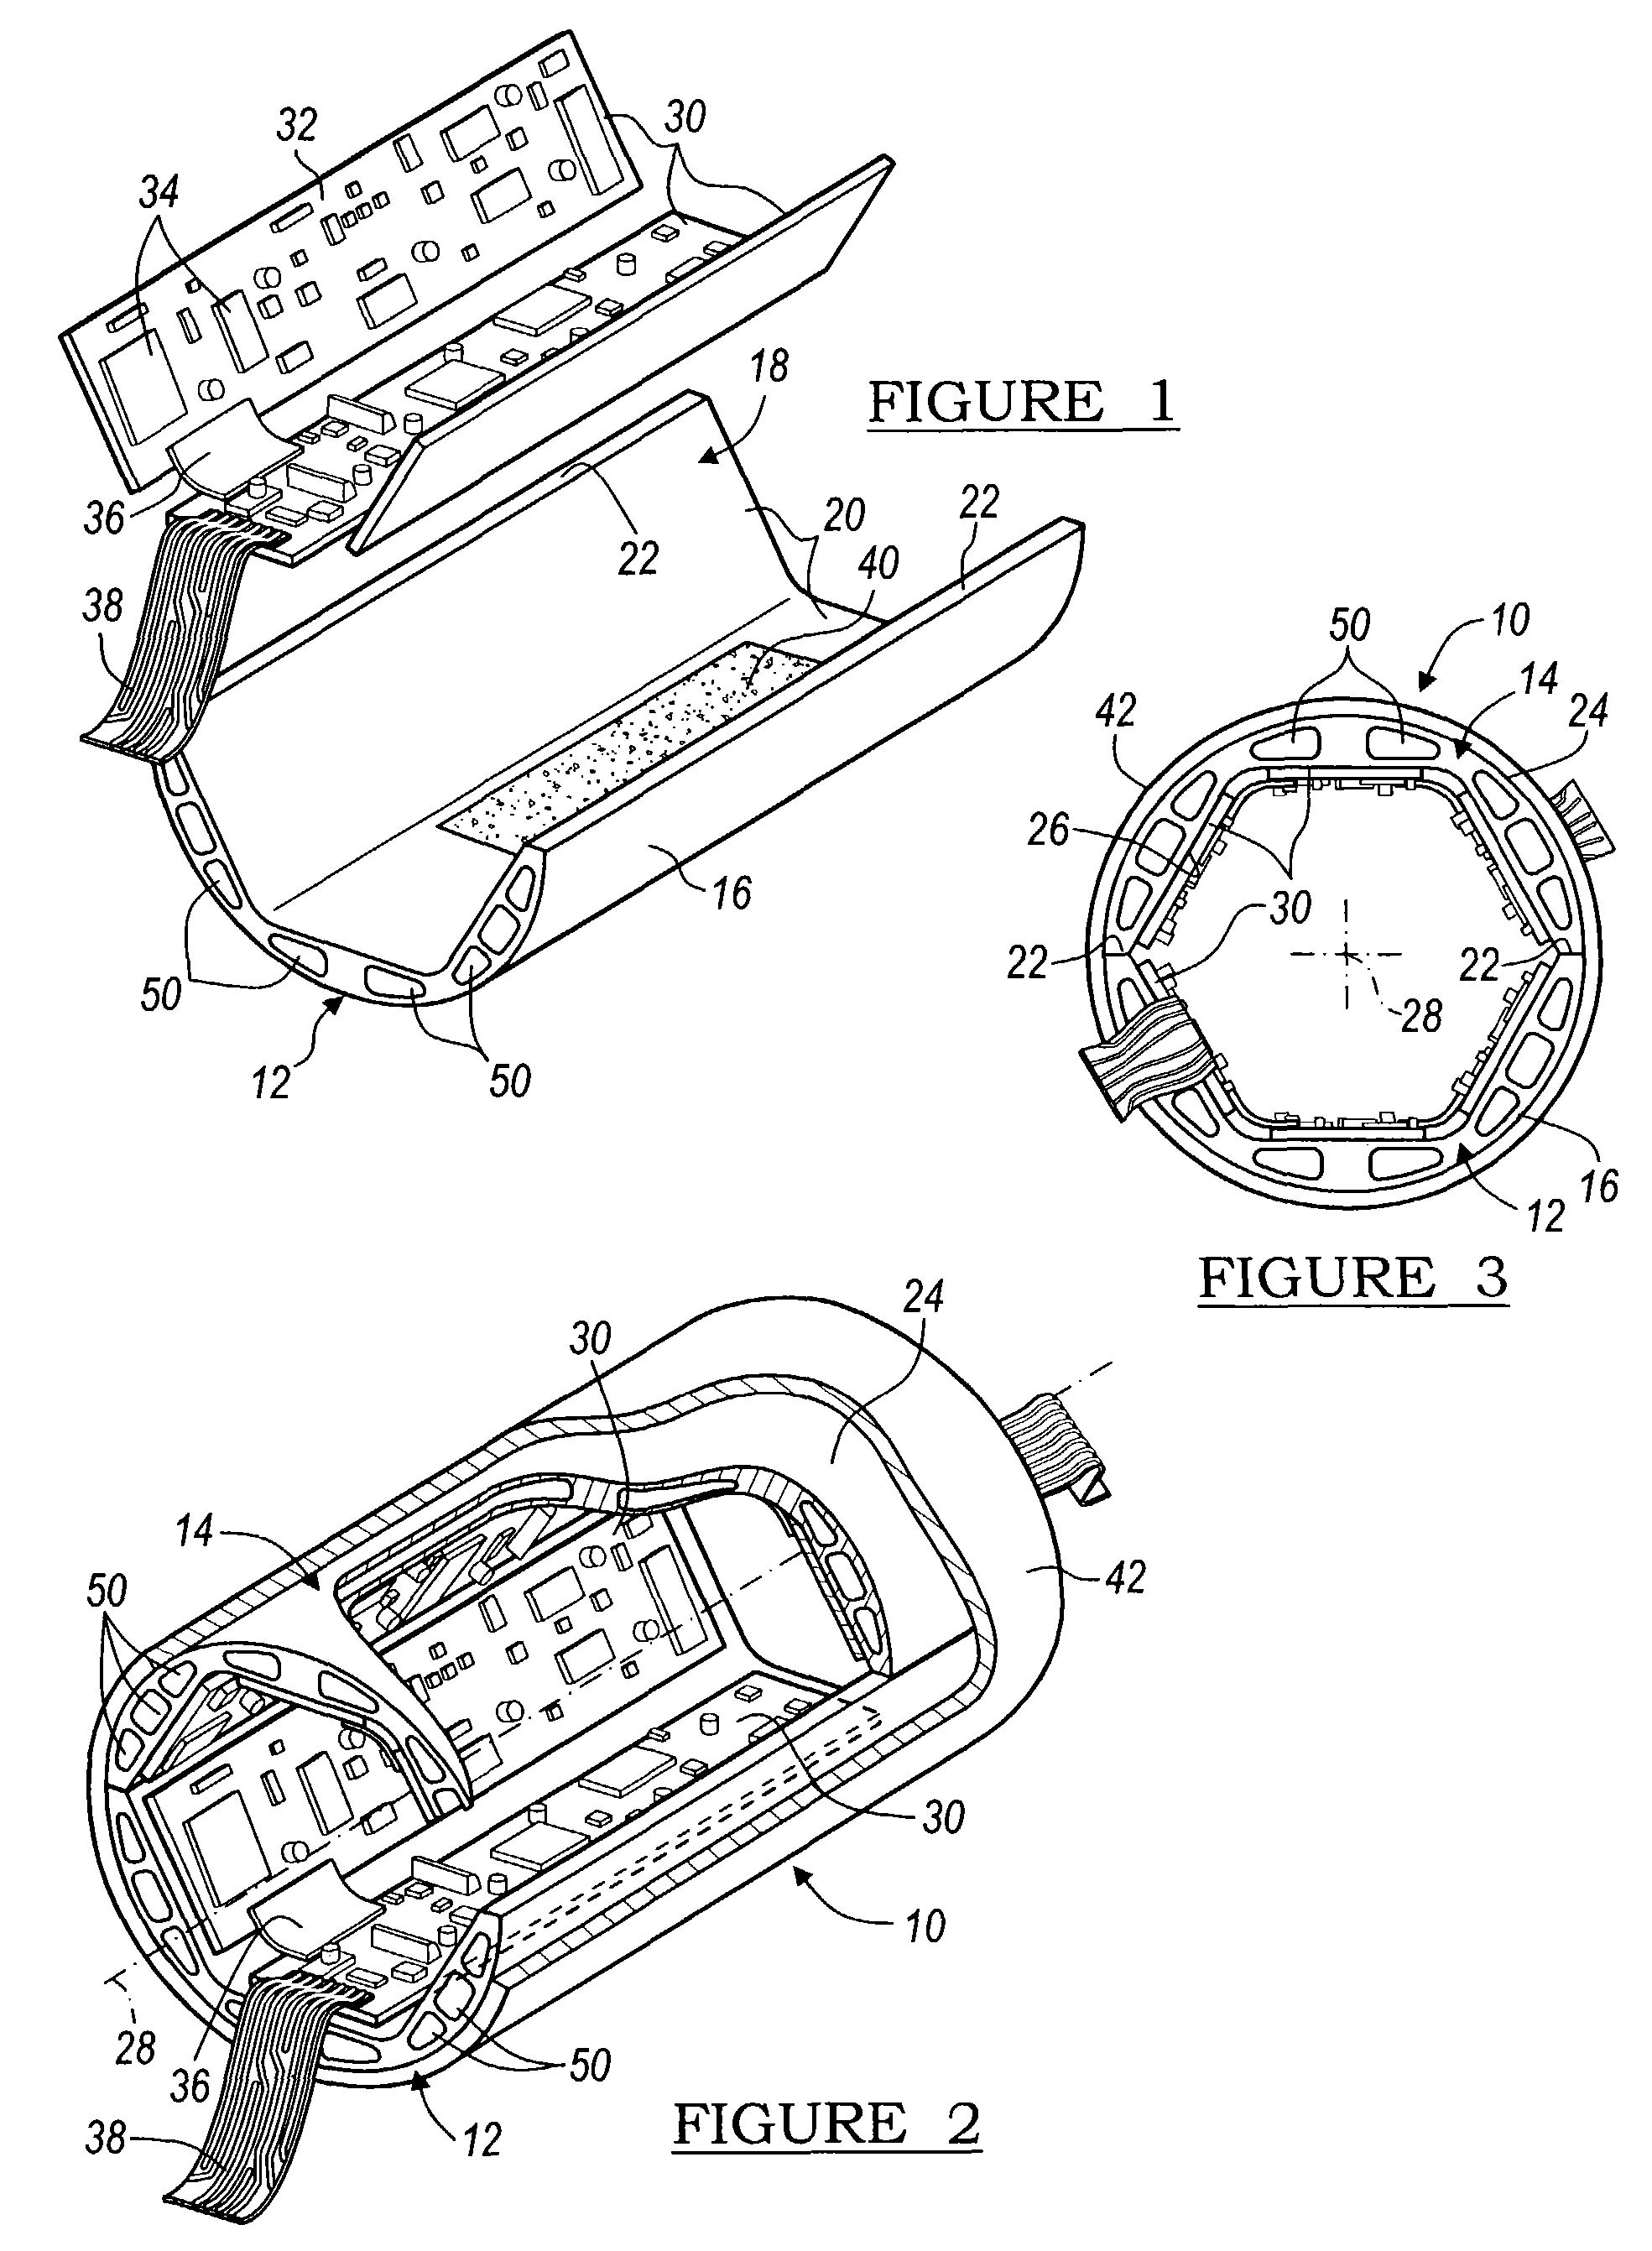 Microelectronic package within cylindrical housing